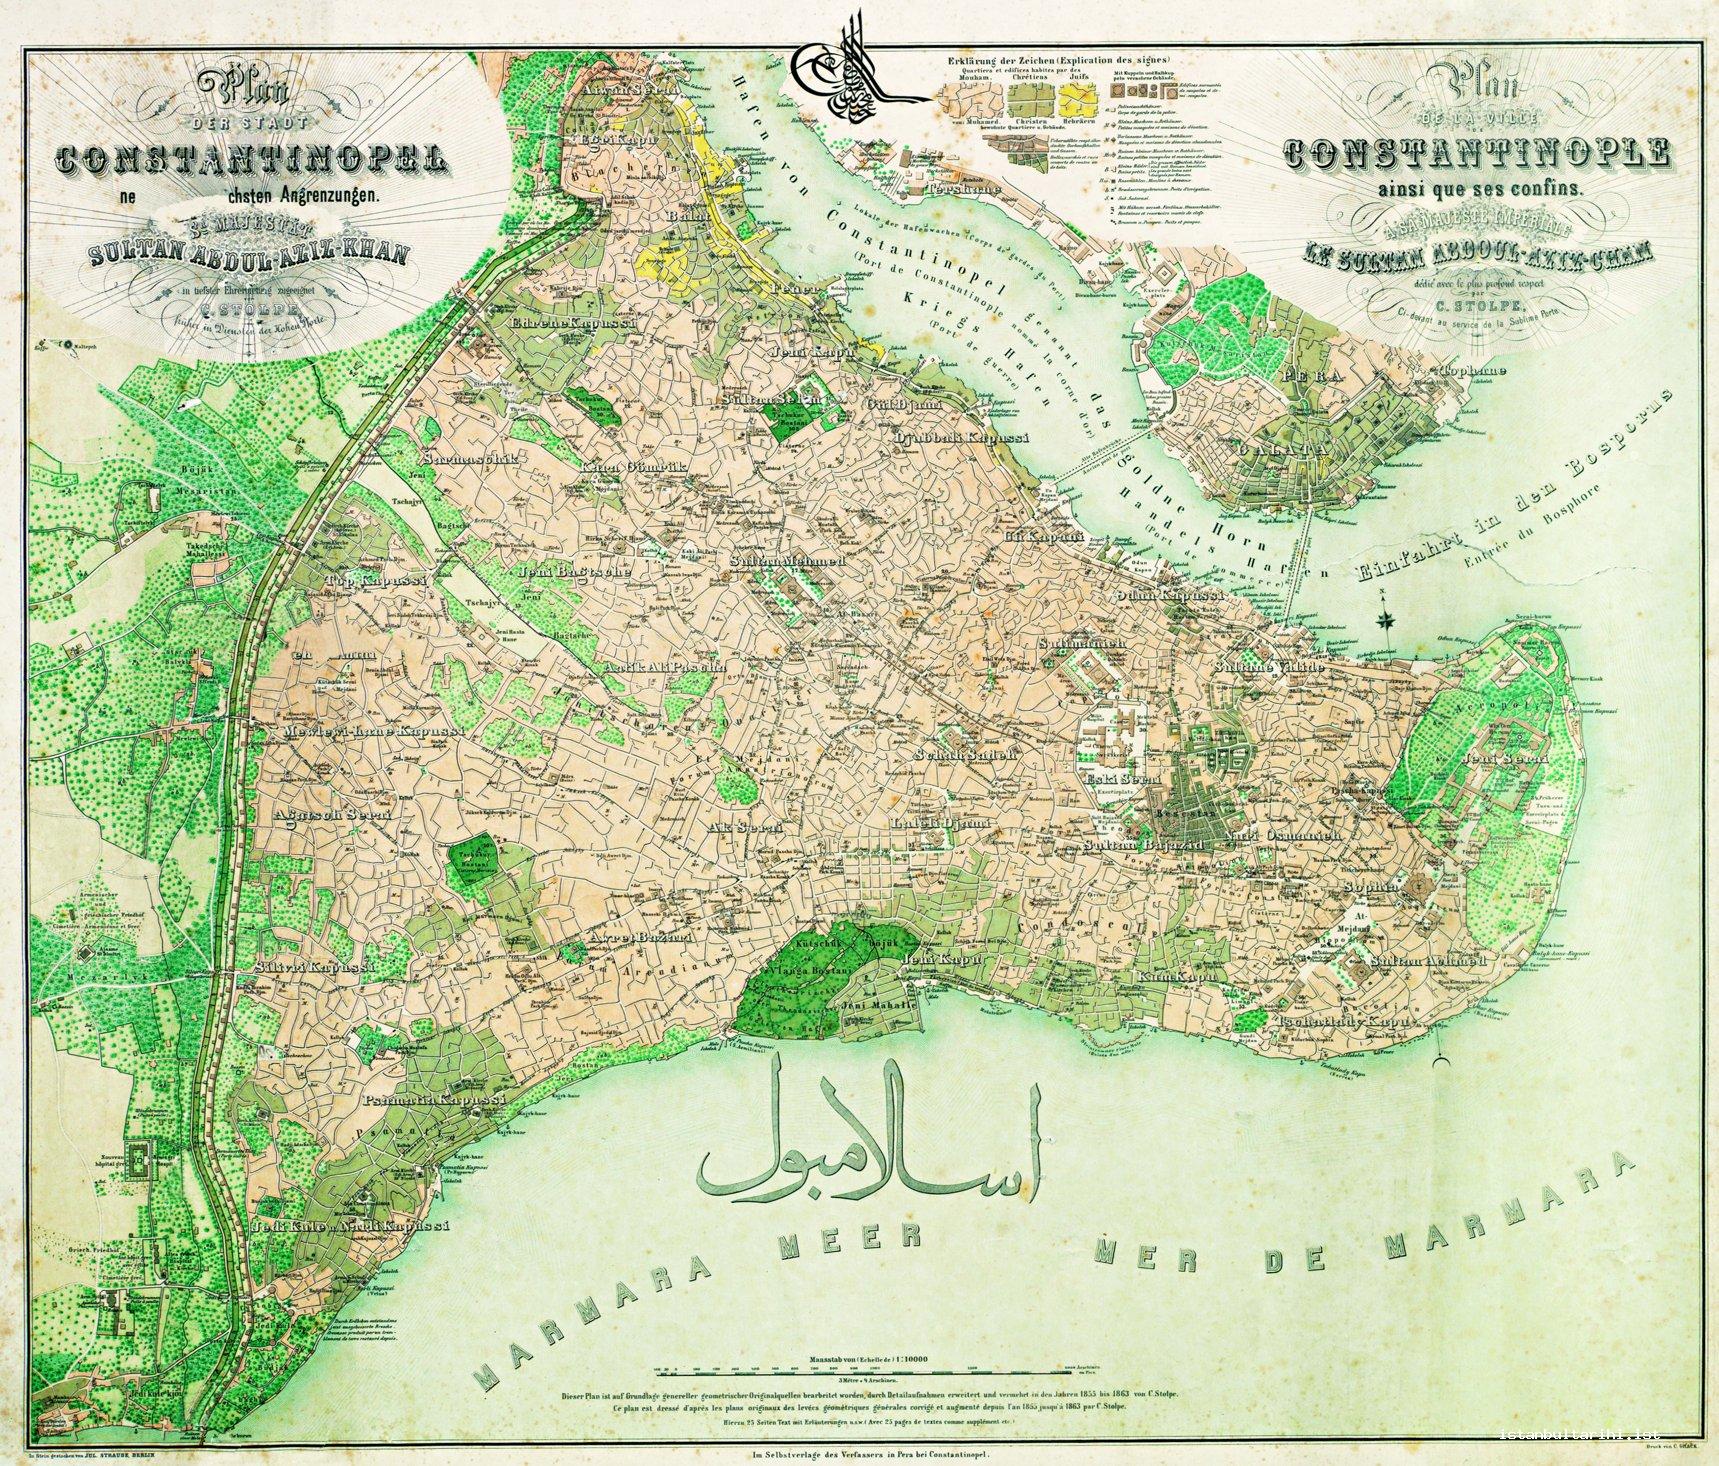 Map 1- The map of Istanbul dated 1863 showing Muslim, Christian, and Jewish population densities (Istanbul University, Rare Books and Special Collections Library, Maps Section) 